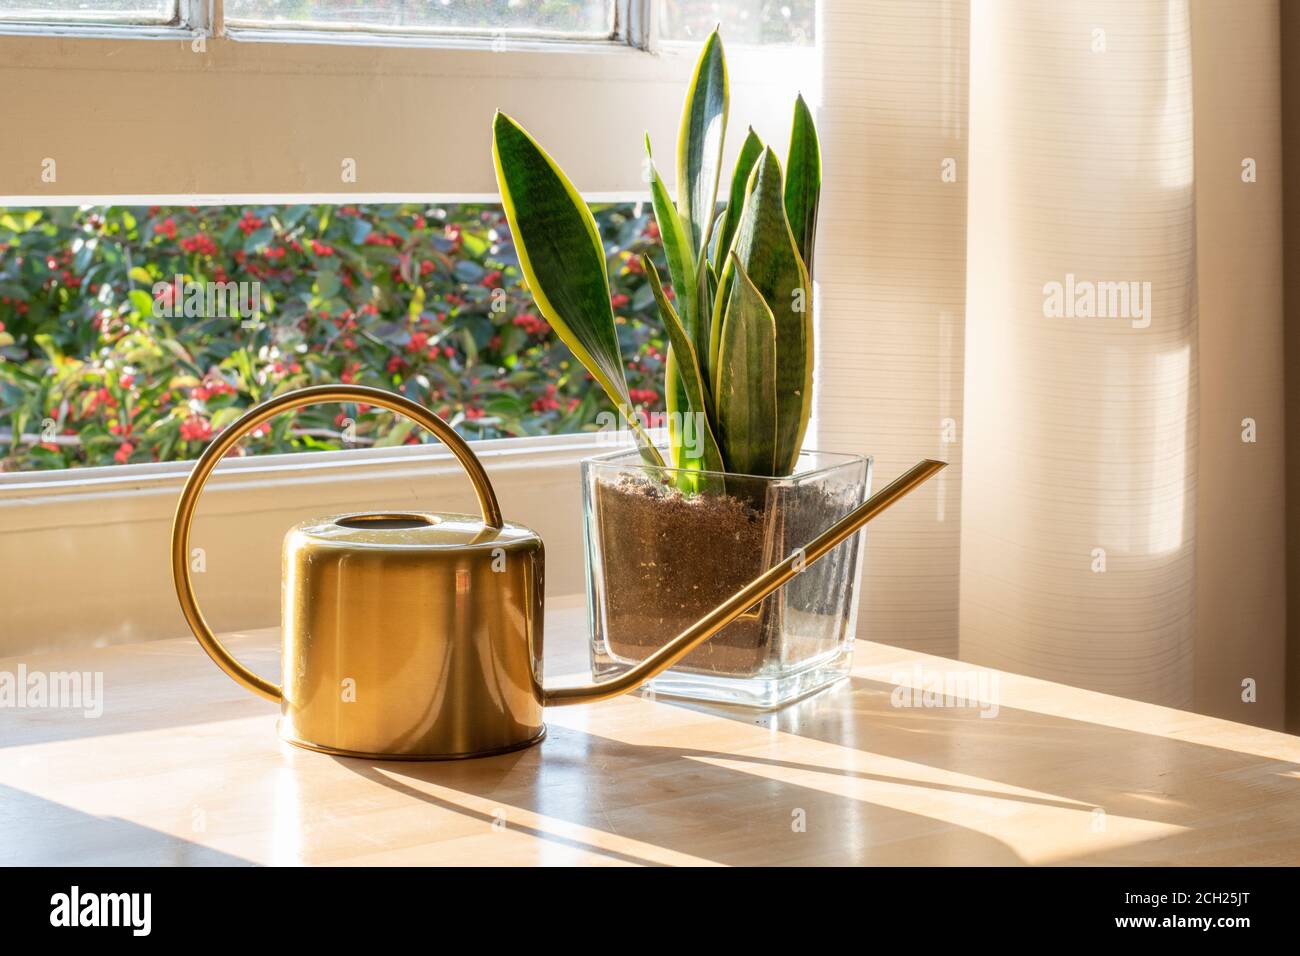 A sansevieria trifasciata snake plant in the window of a modern home or apartment interior. Stock Photo